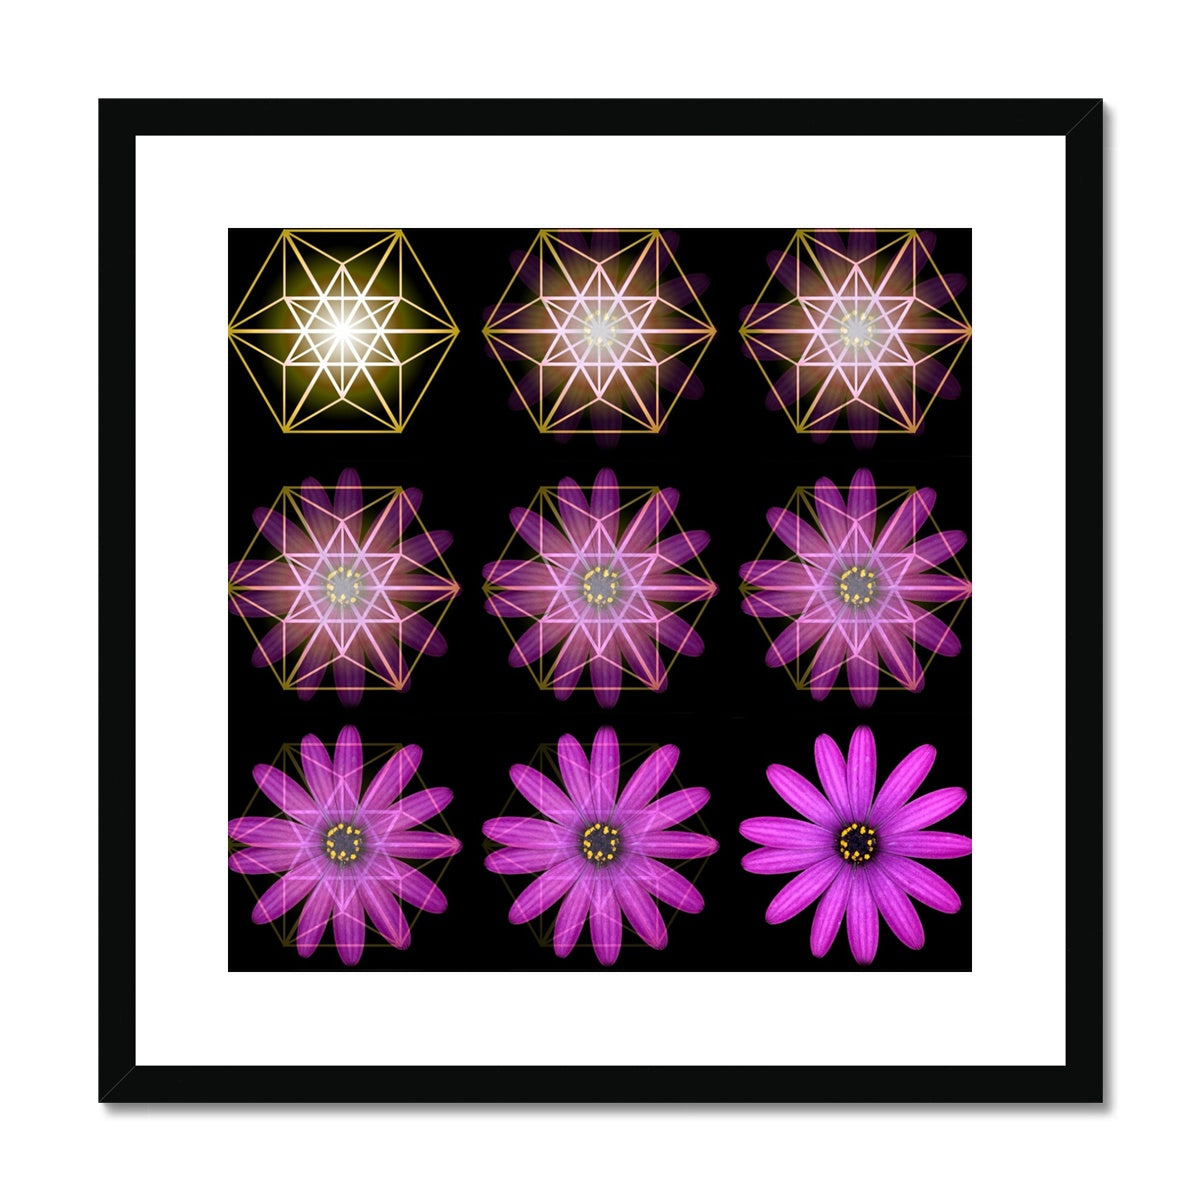 The Geometry of a Flower 1 Framed & Mounted Print